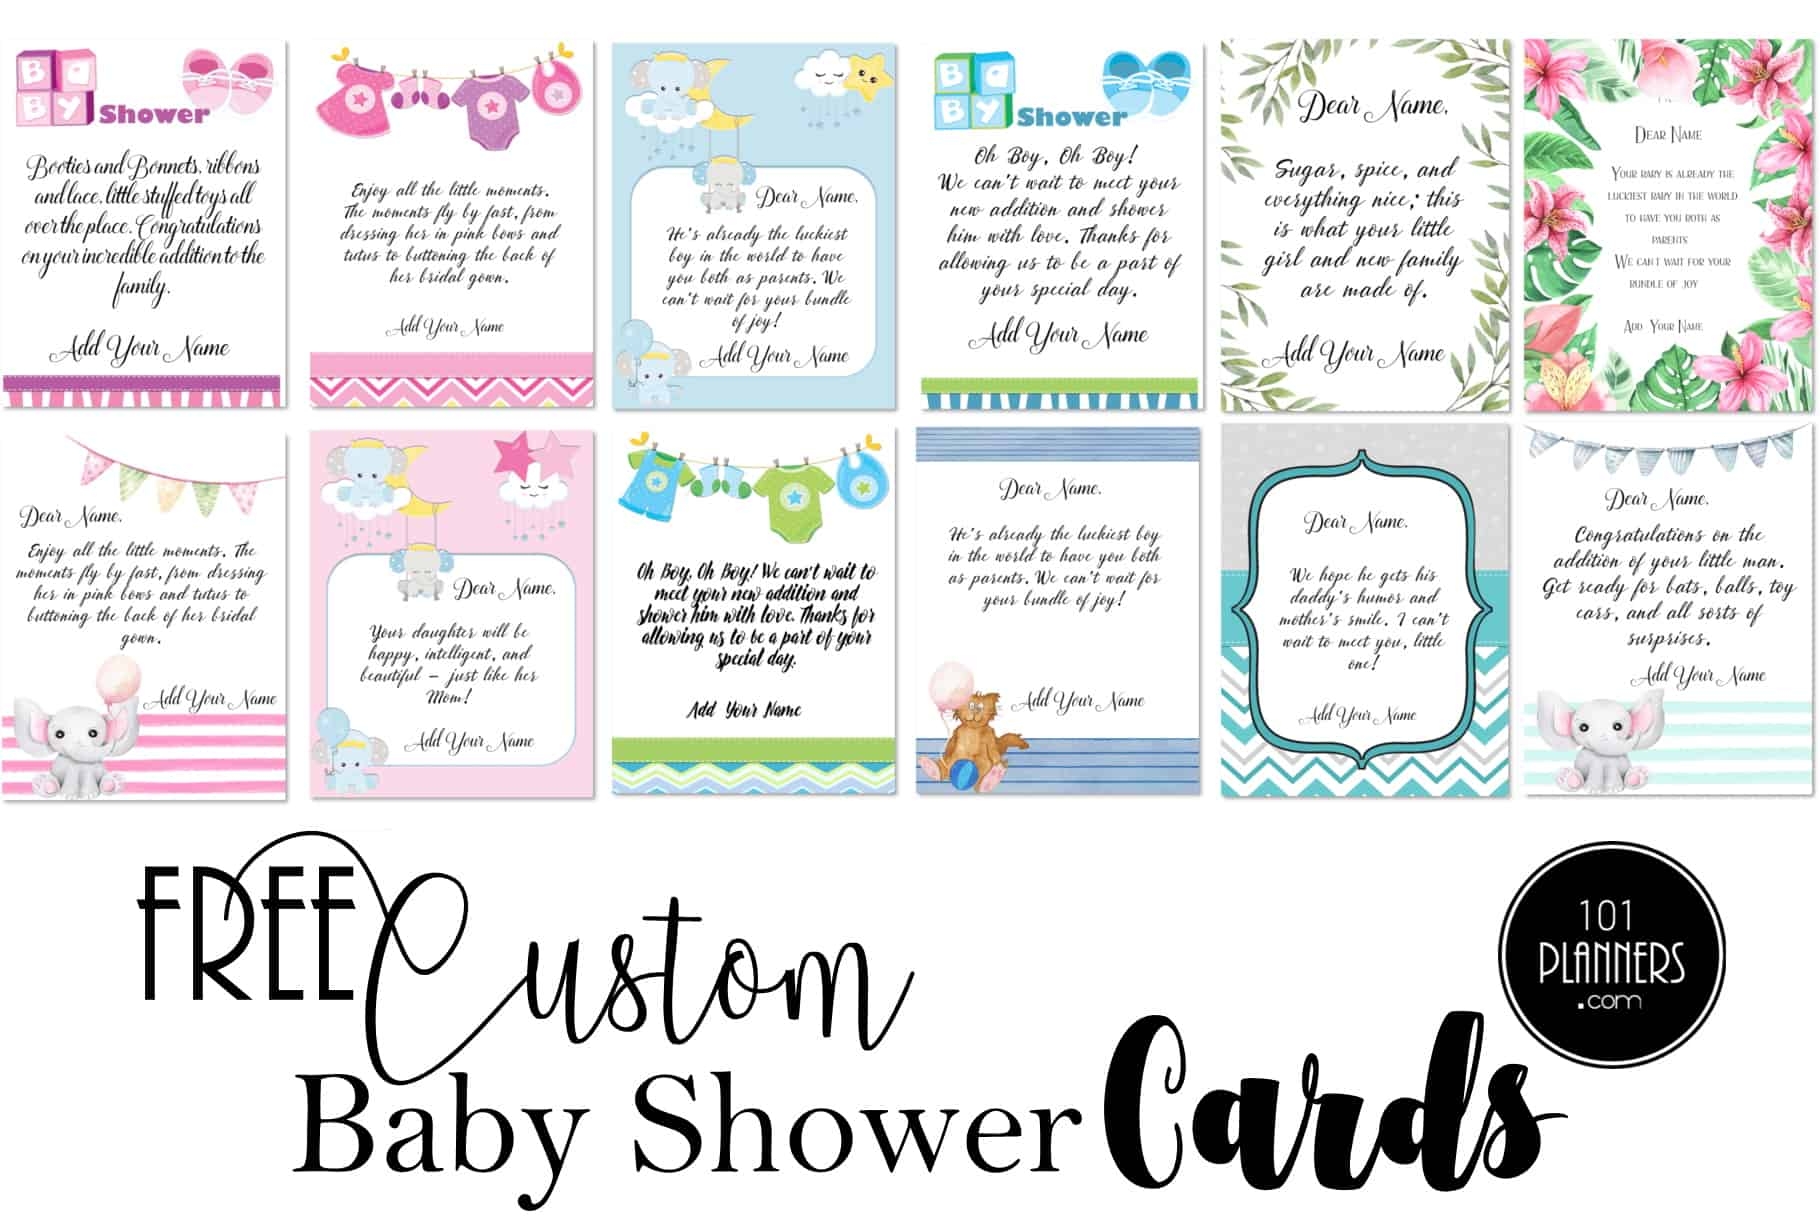 FREE Personalized Baby Shower Card Message Generator - Free Printable Baby Cards Templates